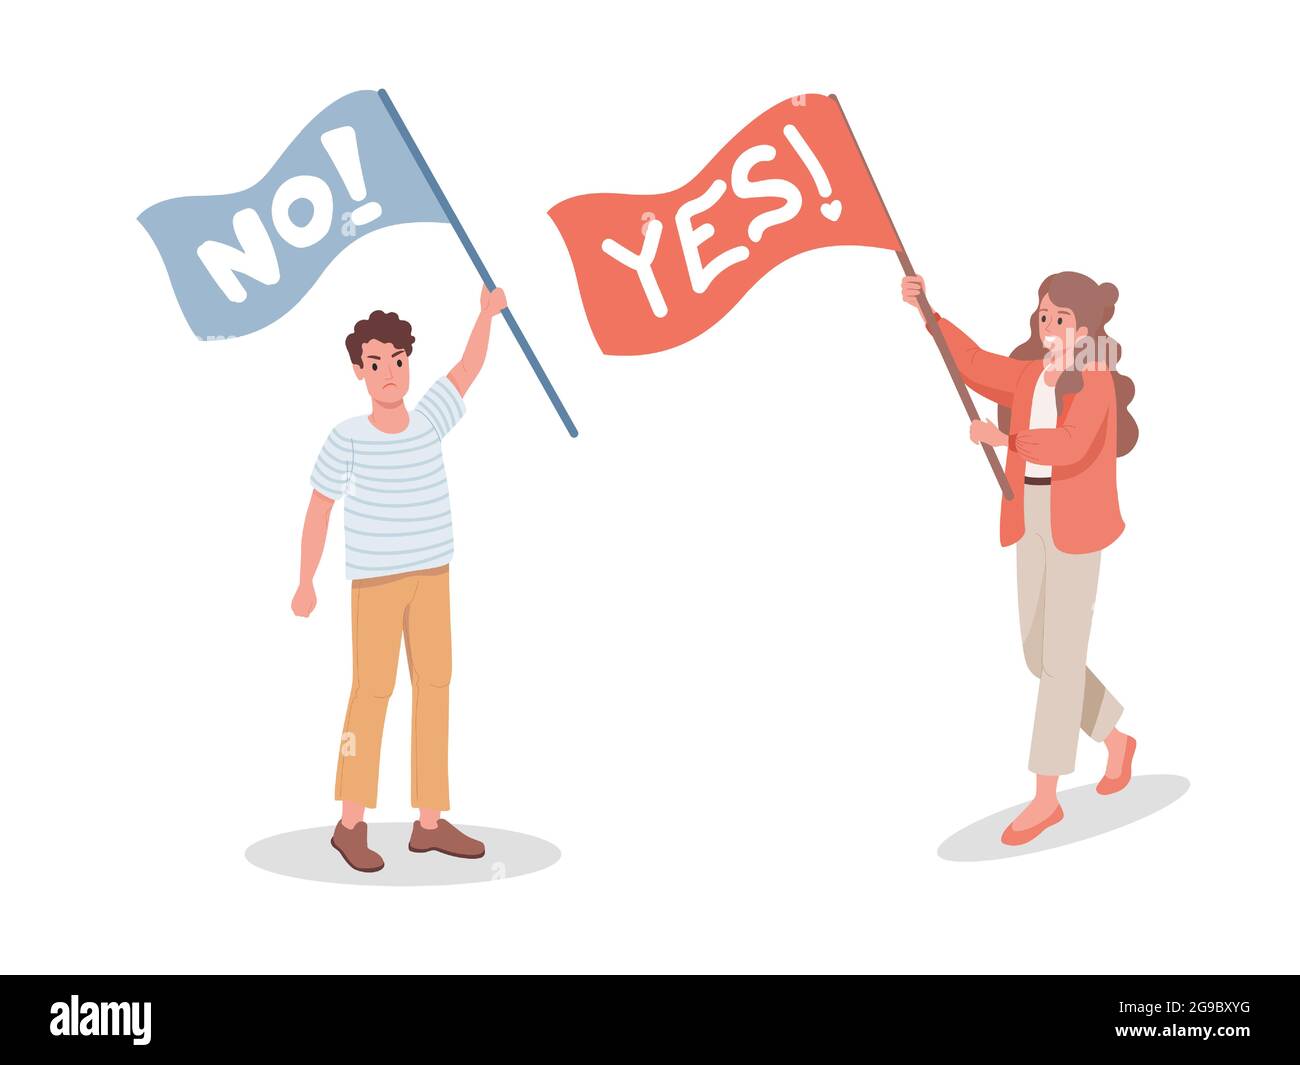 Angry man with No flag and smiling woman with Yes flag vector flat illustration. Protesting man and supporting woman with flags. Social movement, meeting, demonstration, activism, voting concept. Stock Vector